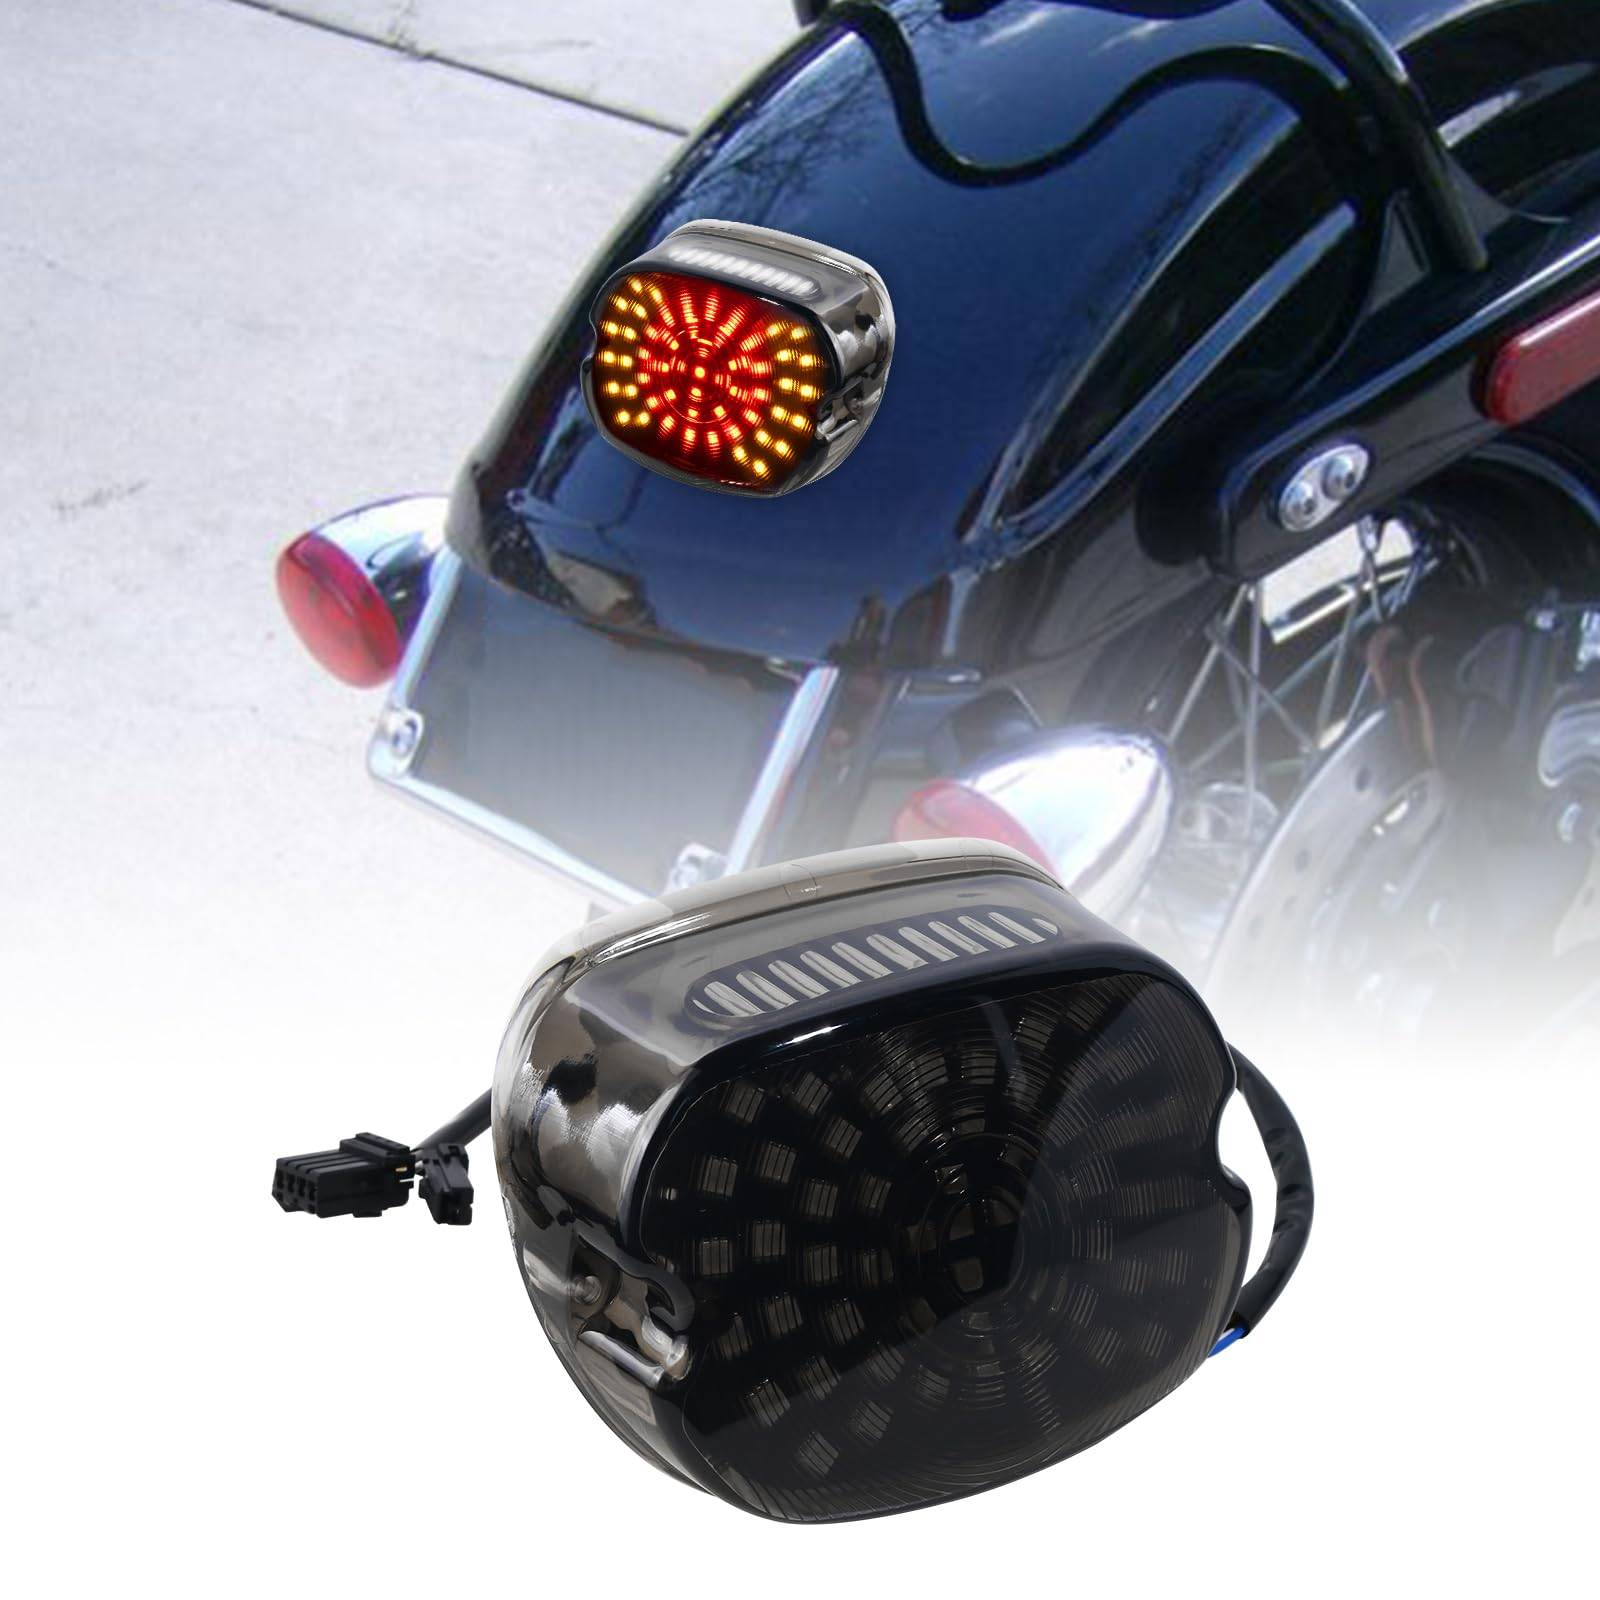 Harley-Davidson Integrated Tail Light & Turn Signals - Fits Sportster, Dyna, Road King